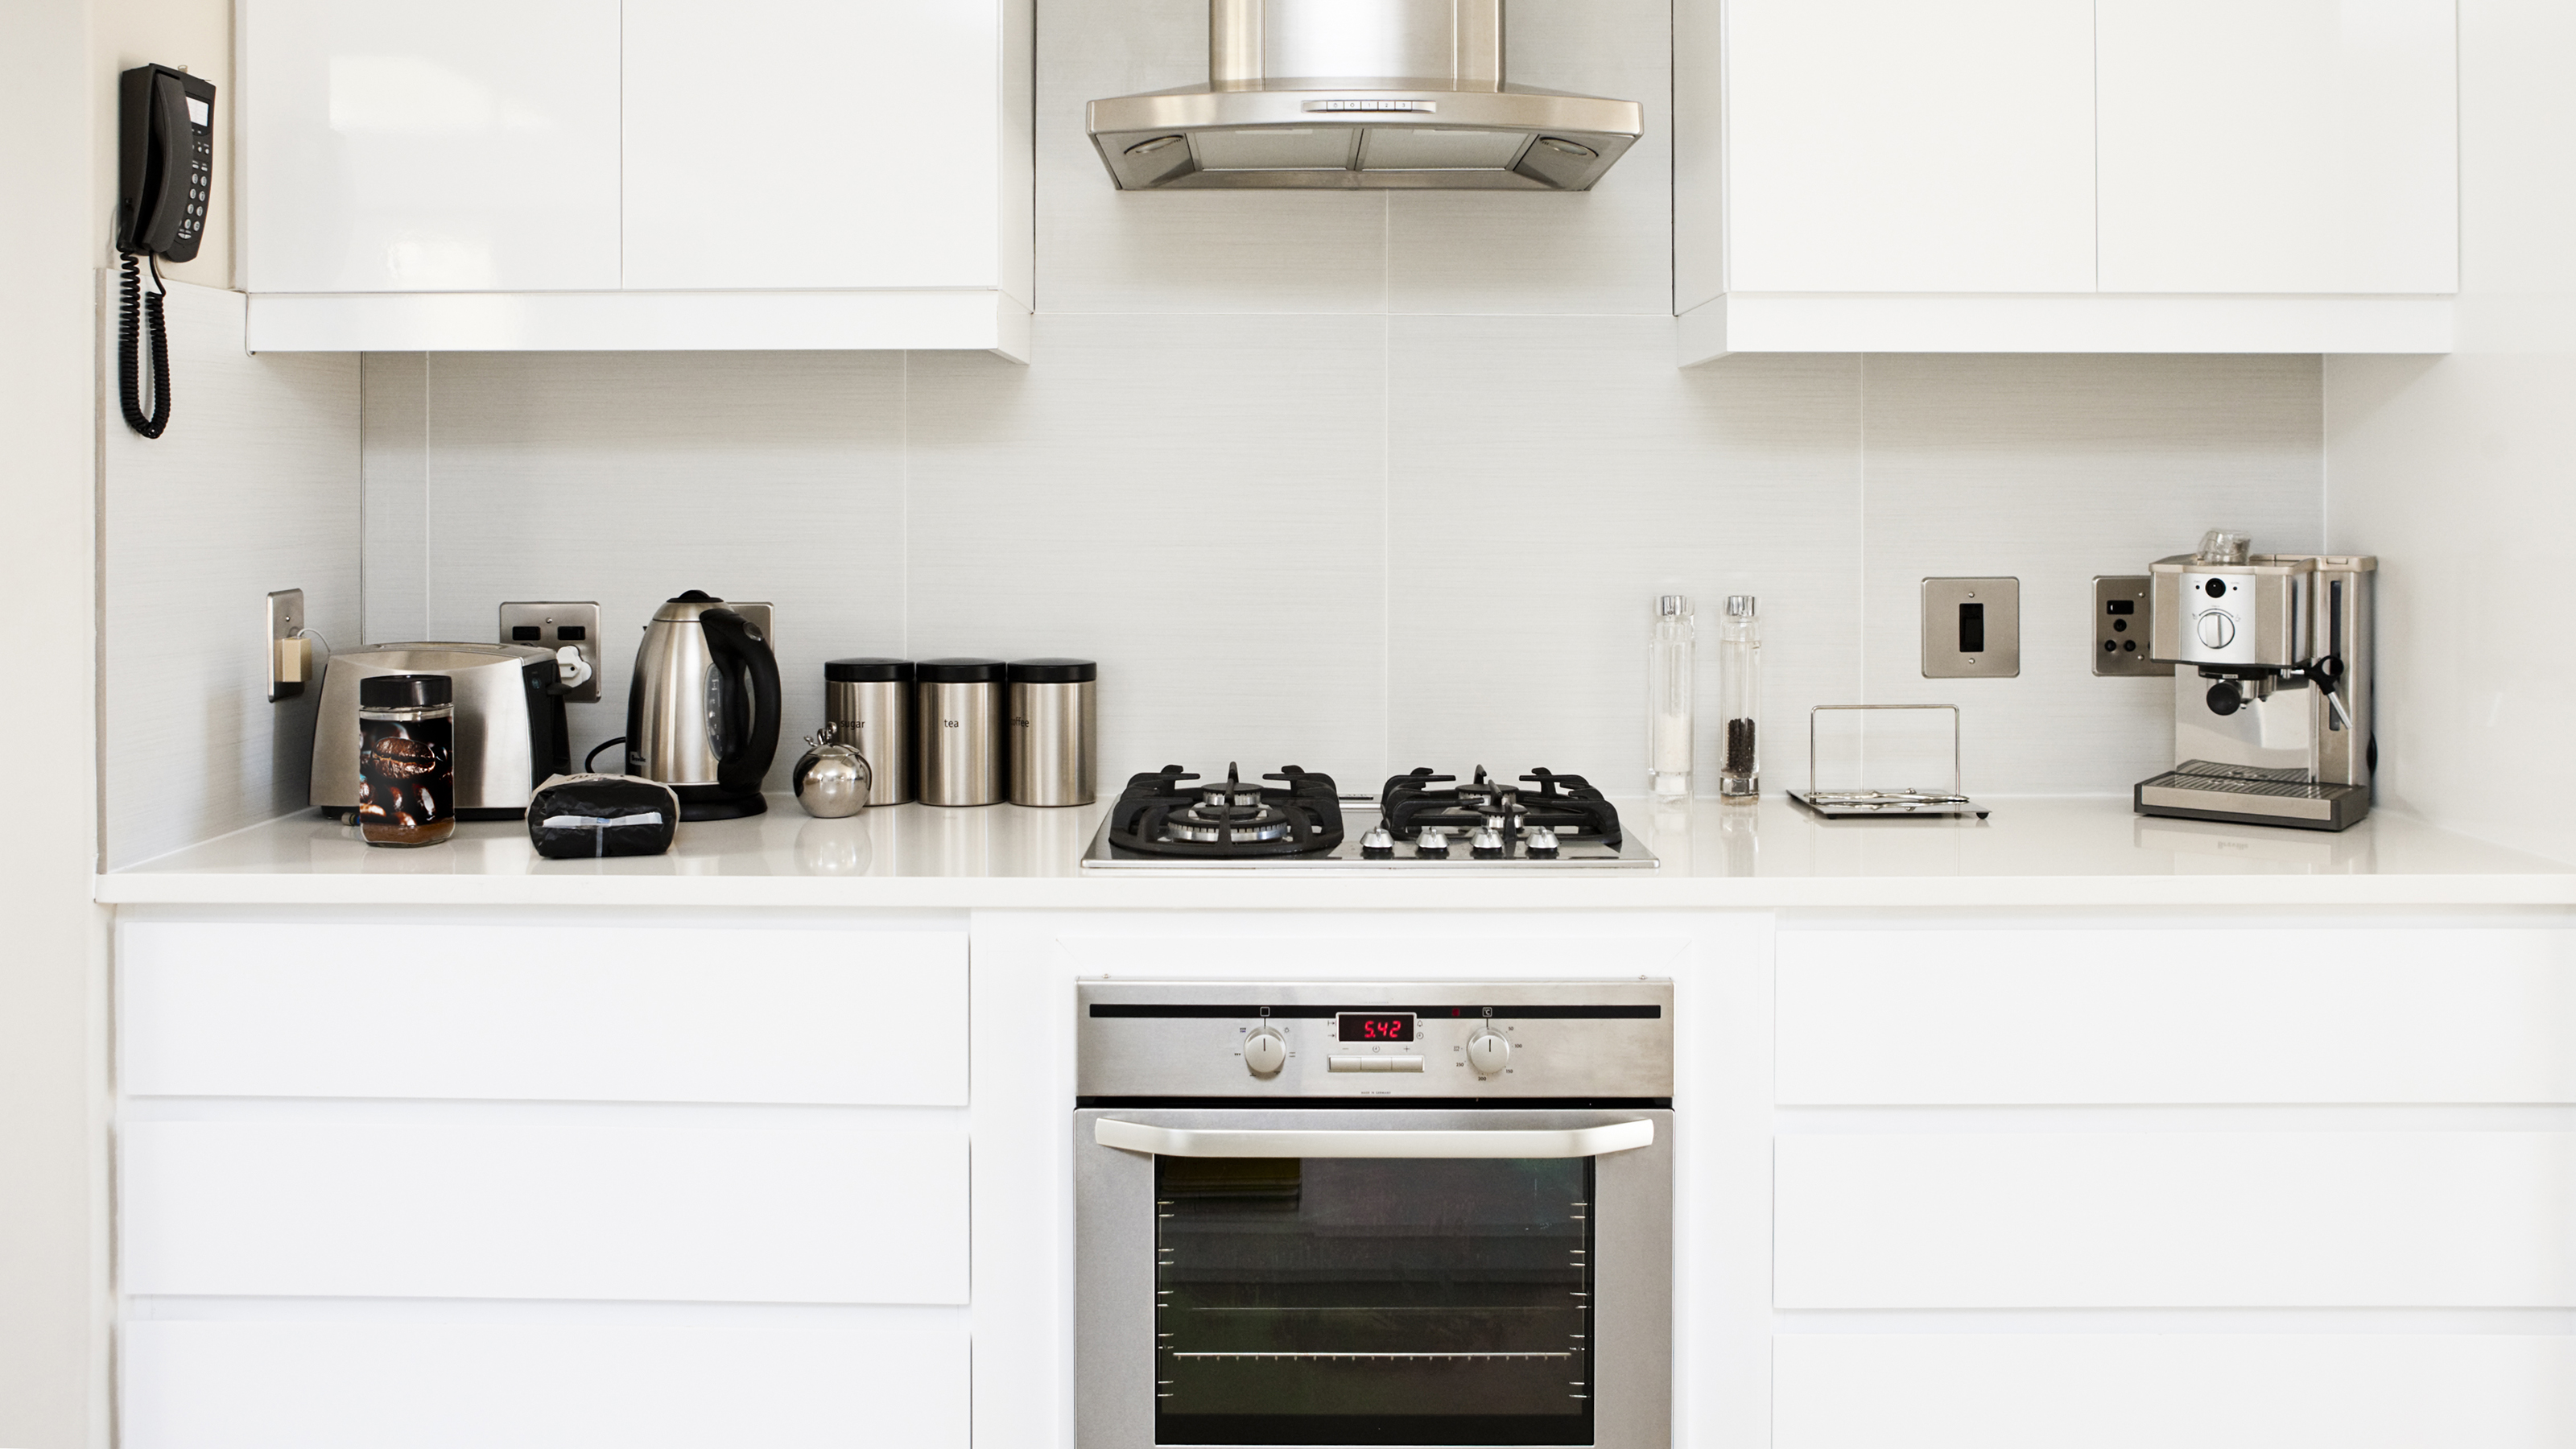 How to Clean Stainless-Steel Appliances and Kitchen Items the Right Way